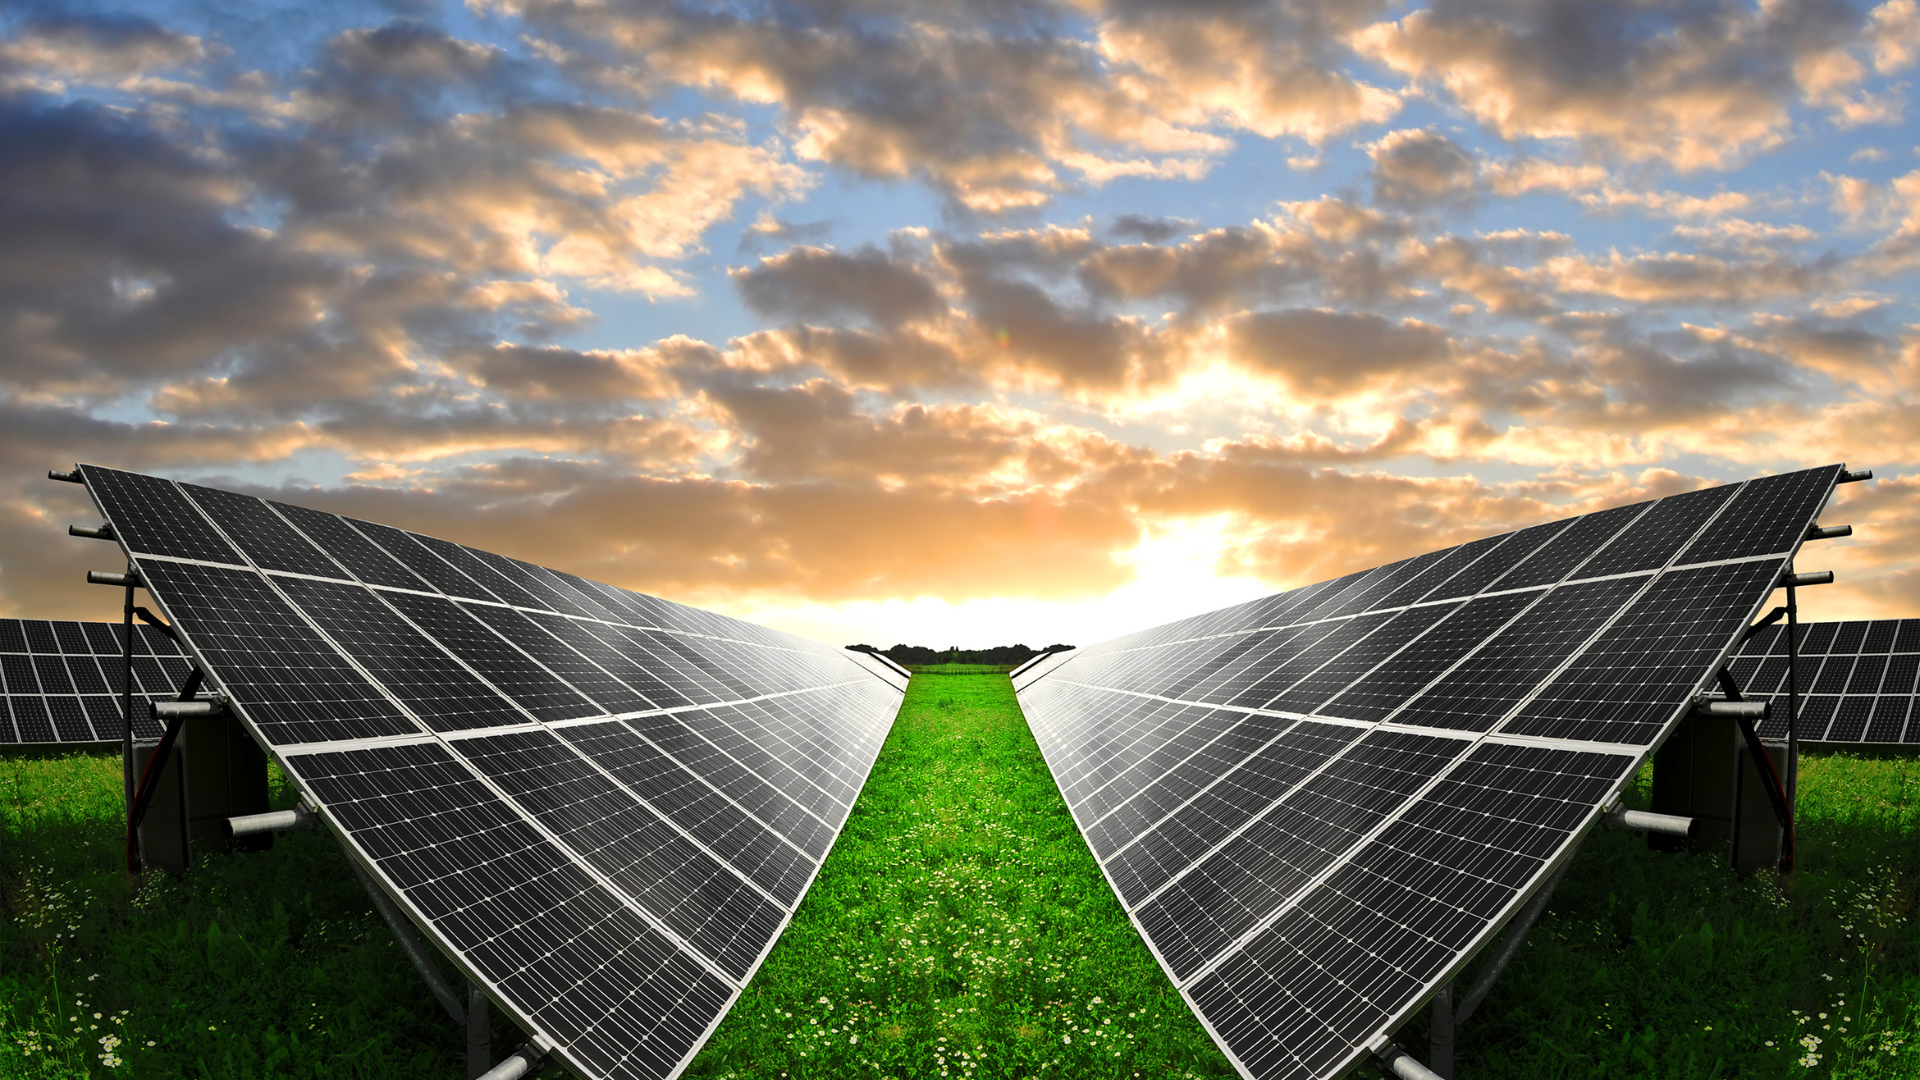 Going Green: How Solar Energy Solutions Can Benefit Your Home and Business